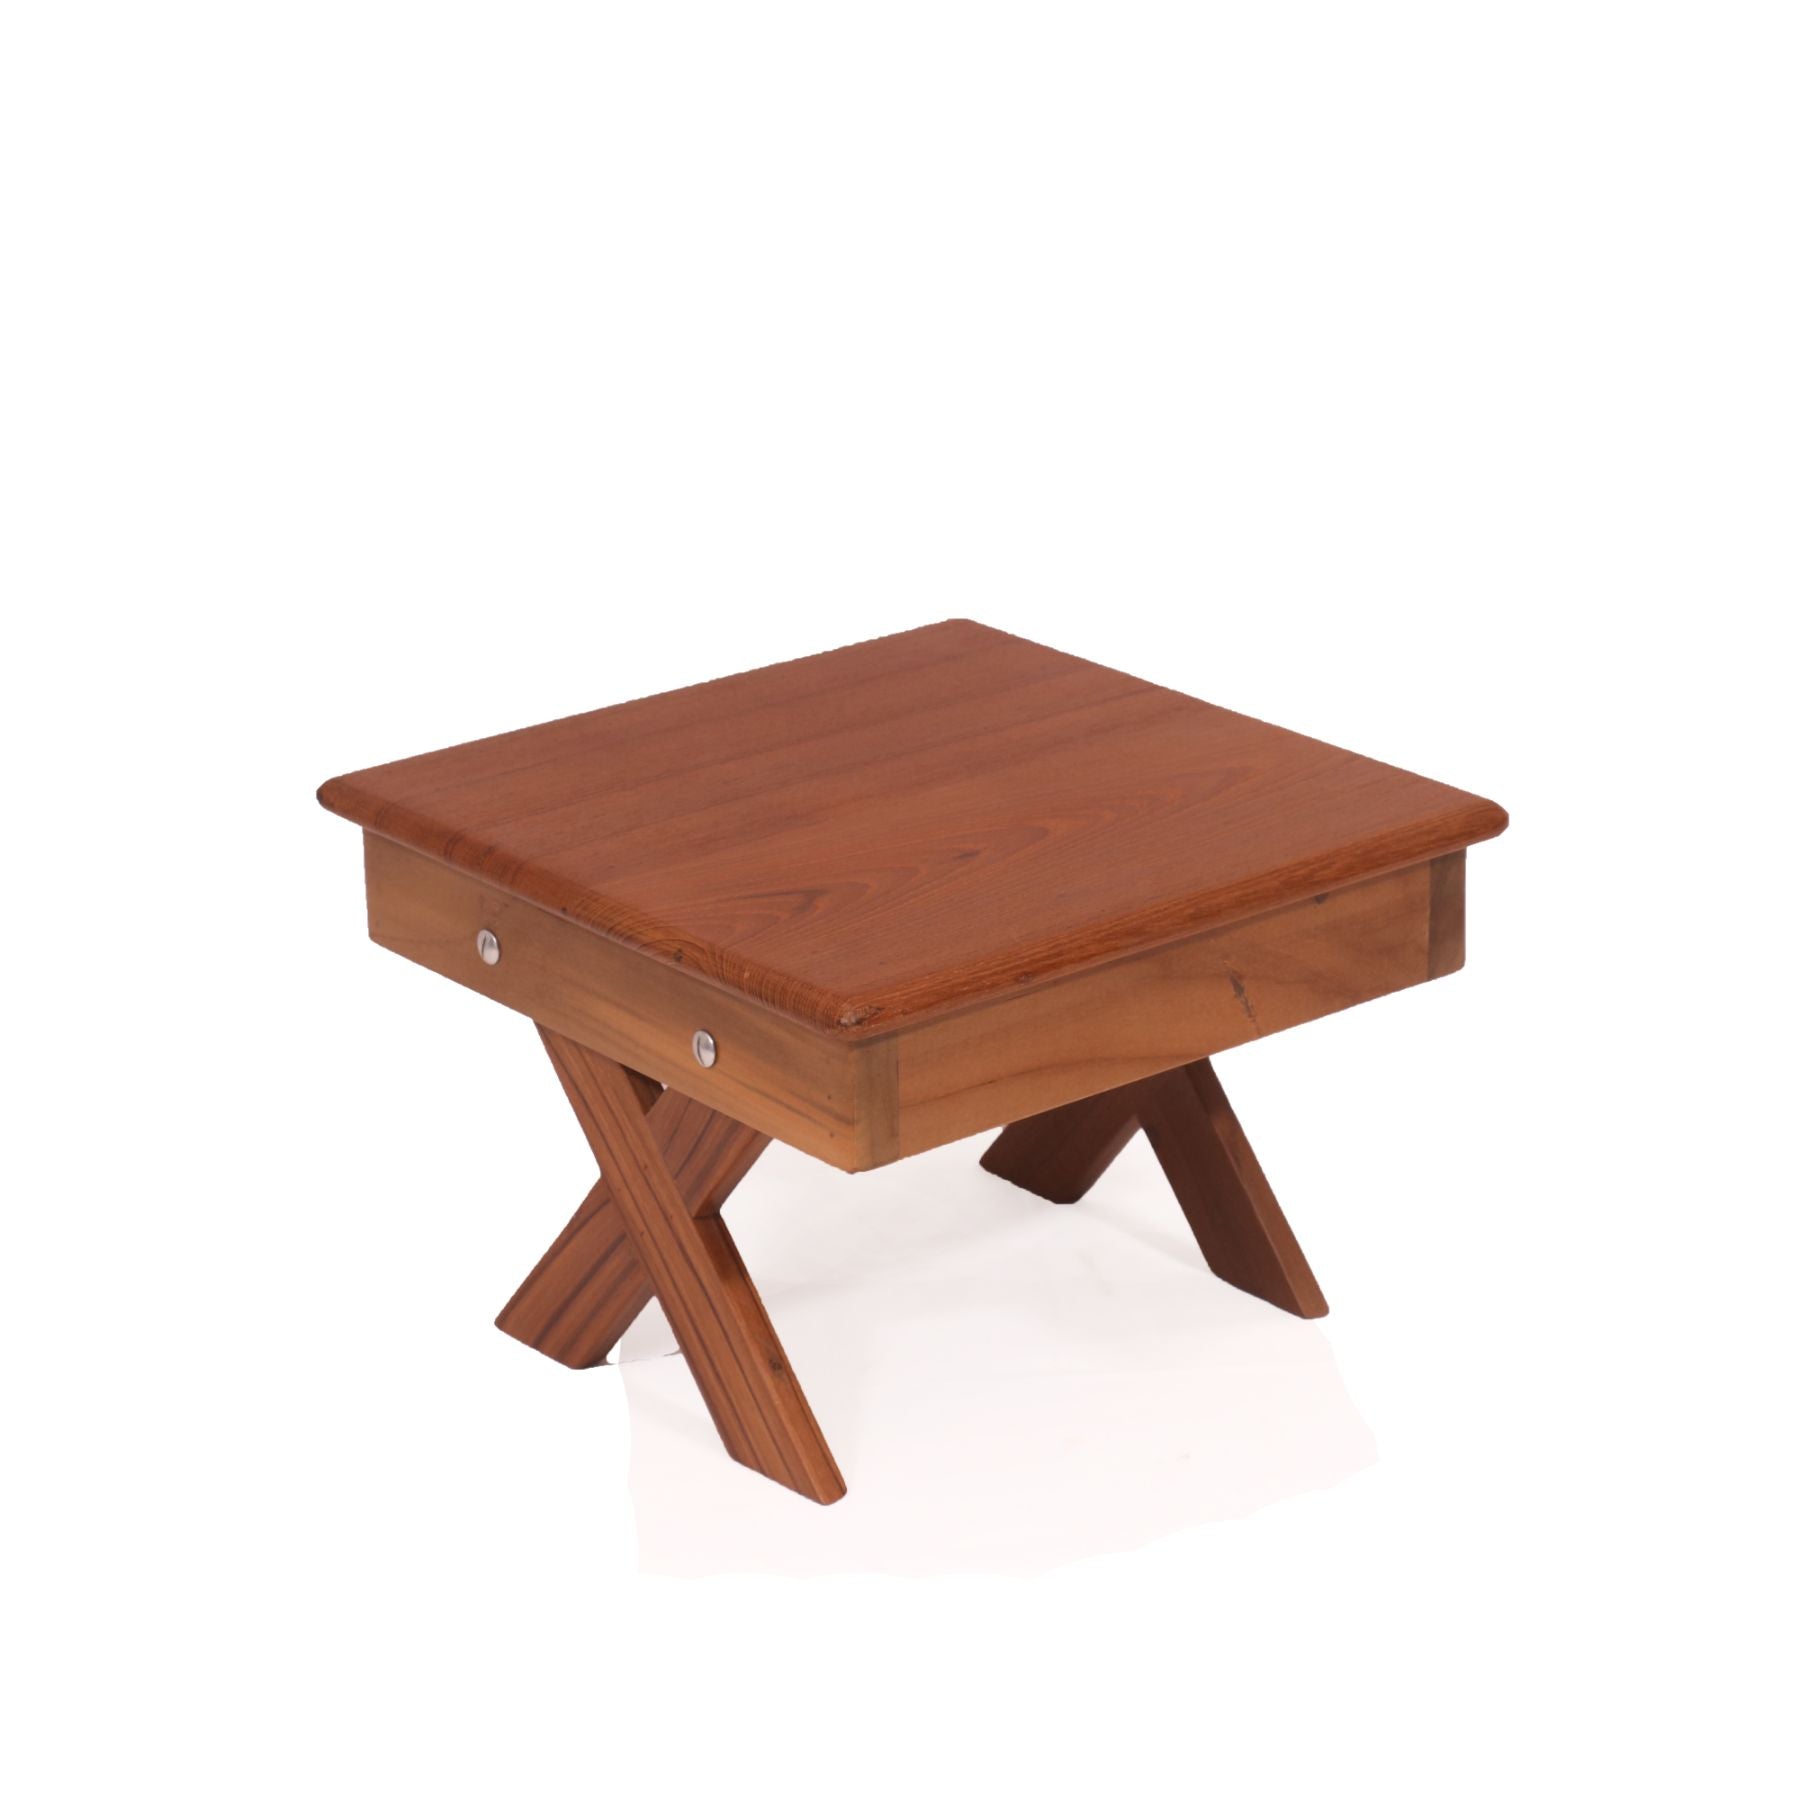 Director's Legs Wooden Table Lapdesk